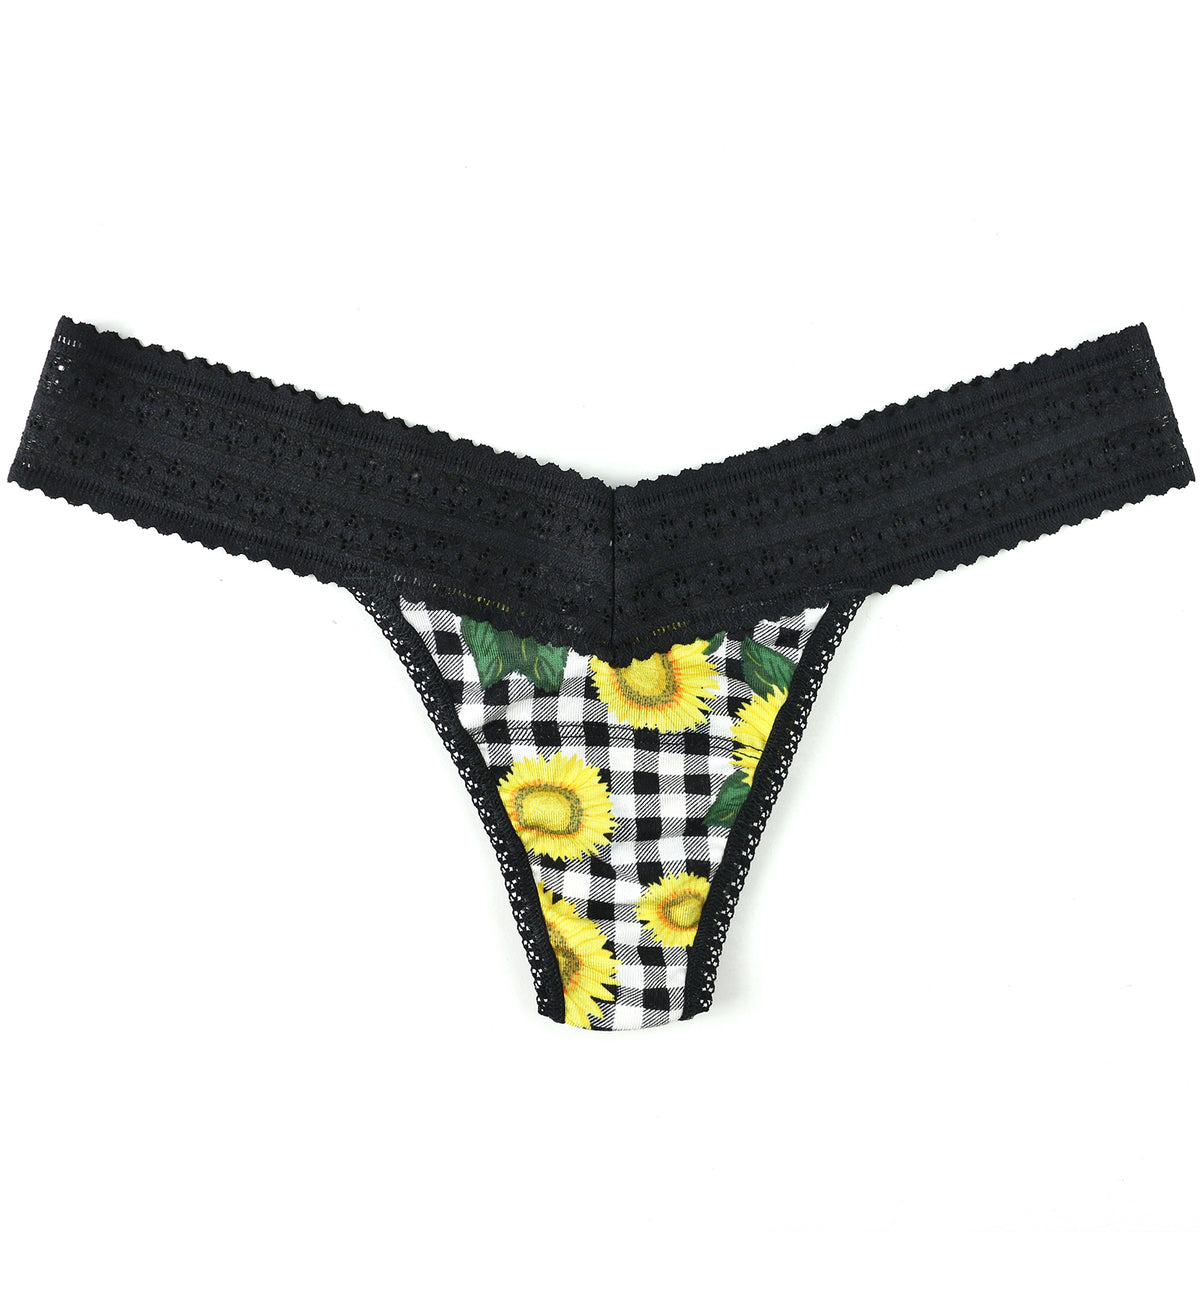 Hanky Panky Dream Printed Low Rise Thong (PR681004),Fields of Gold - Fields of Gold,One Size